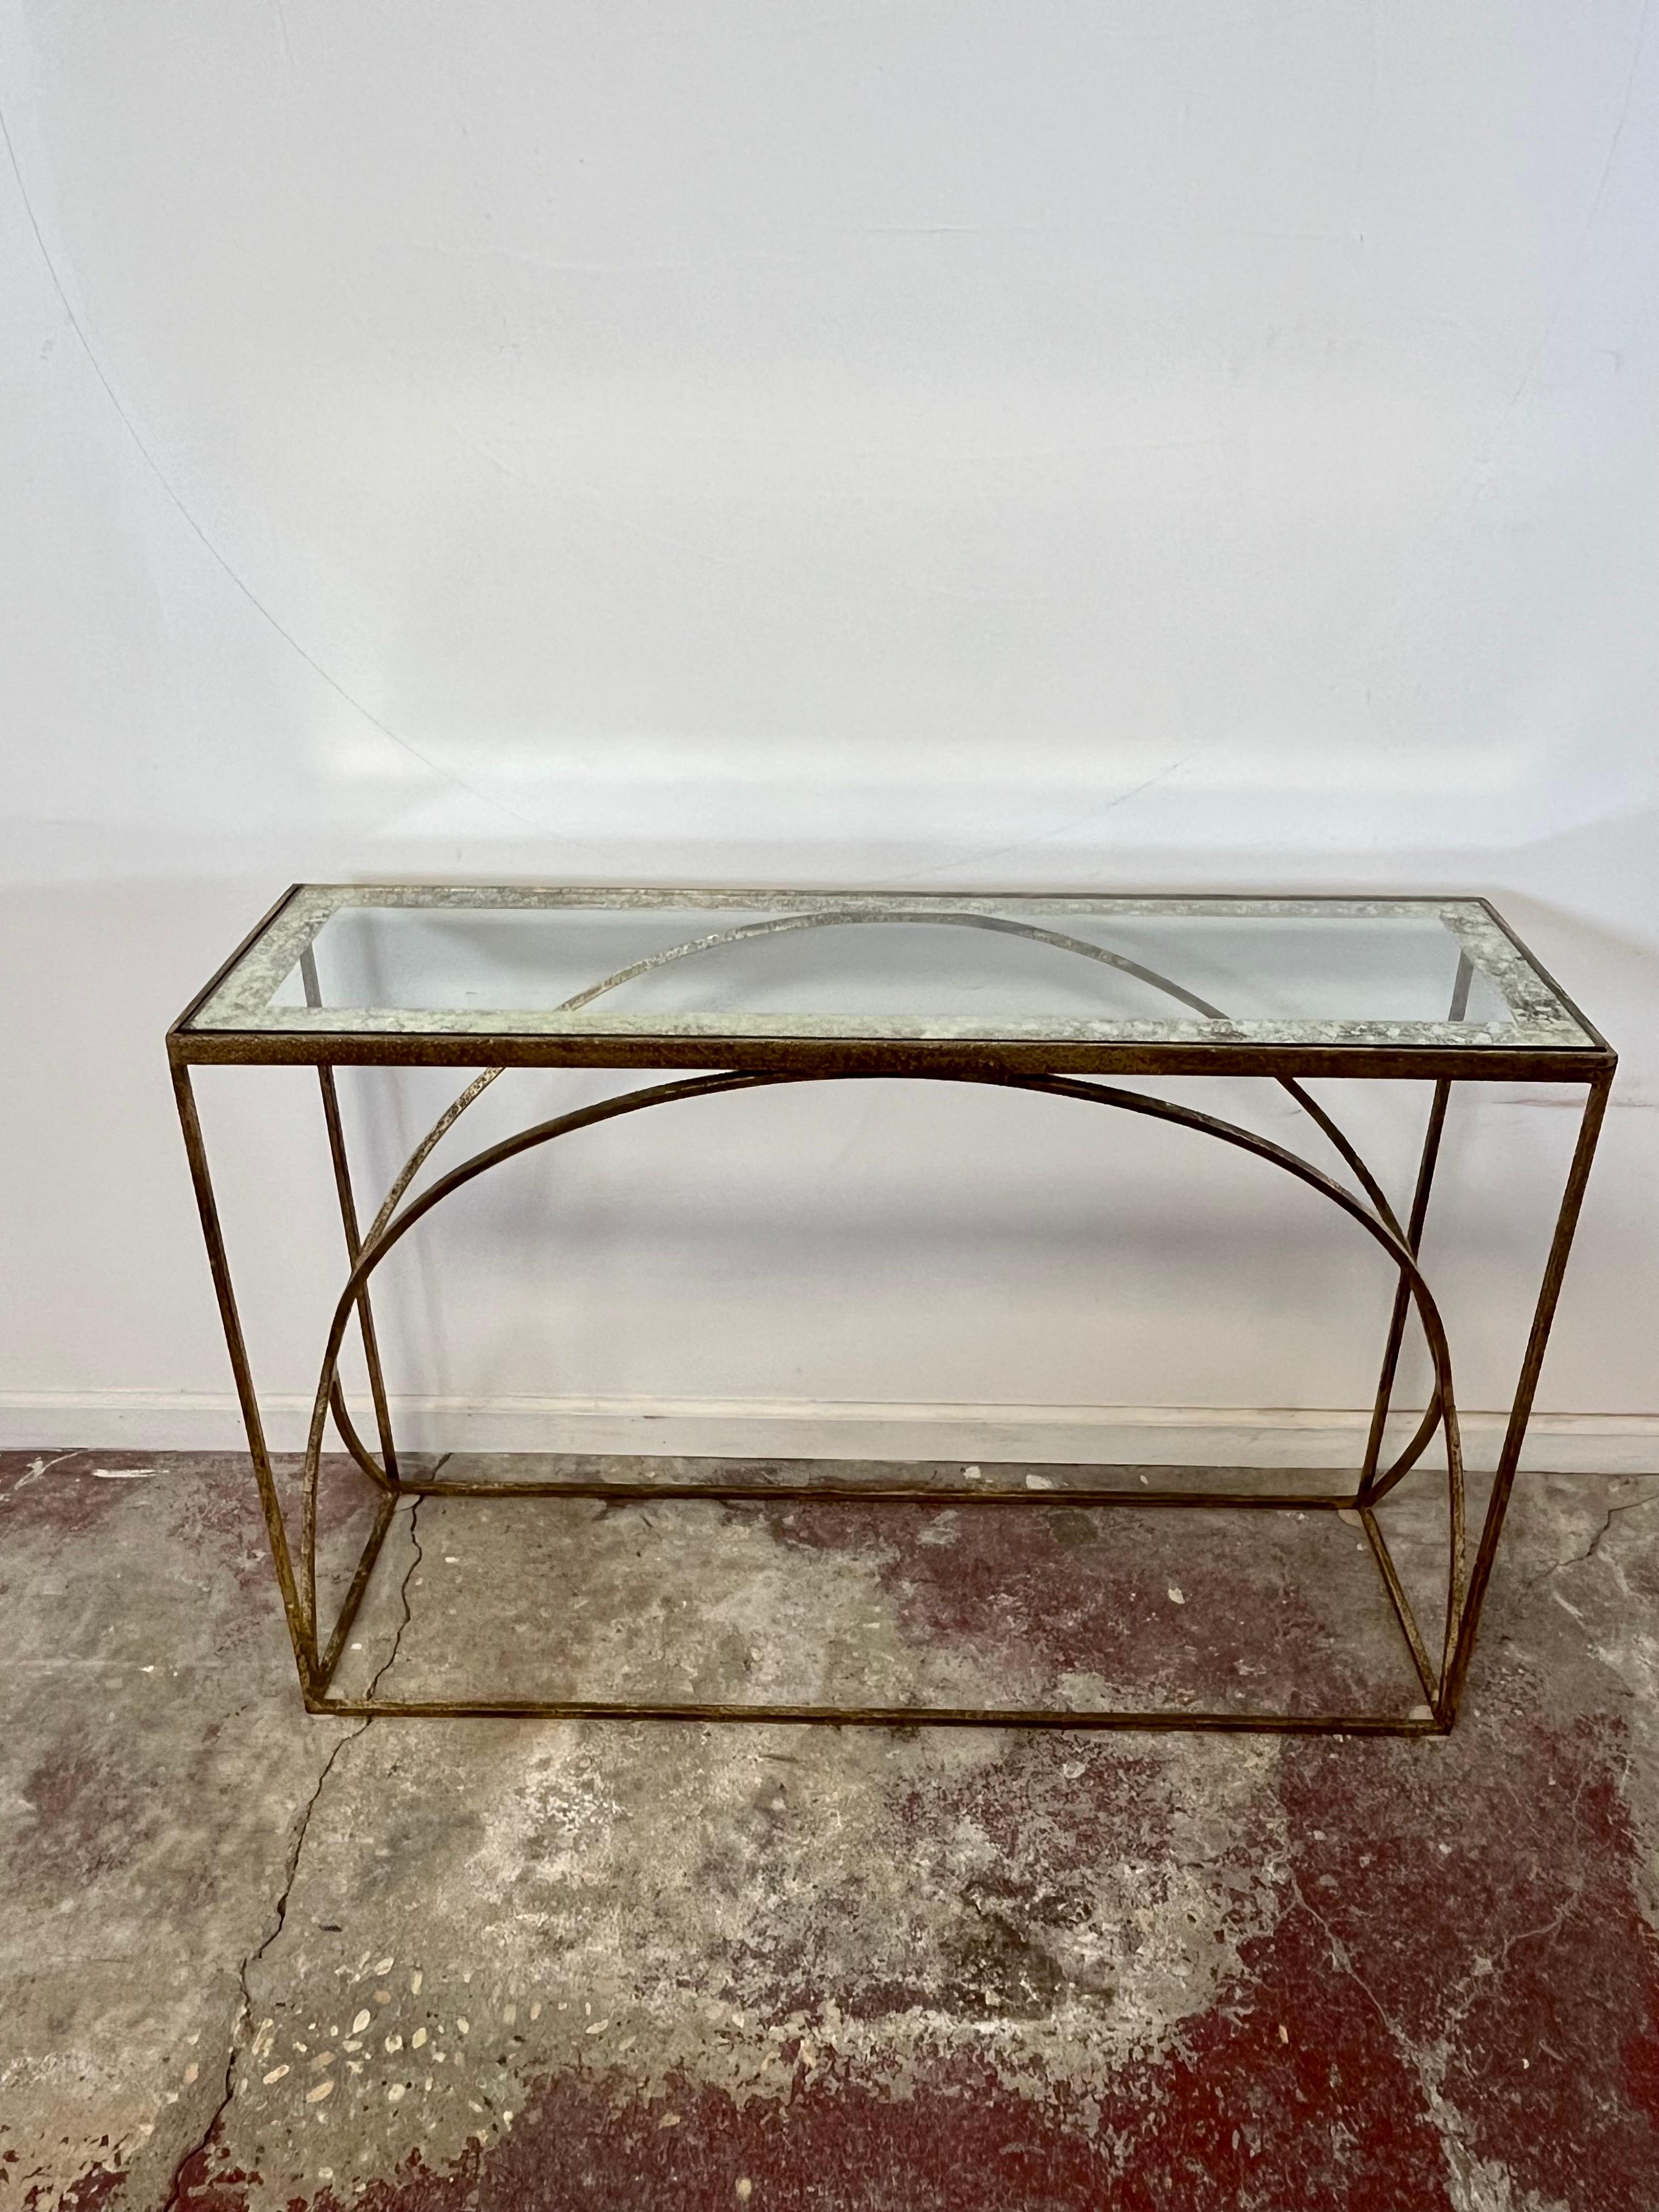 Stunning contemporary console finished in a spectacular forged gilt finish. Ellipse design with a striking glass top with oil drip border.
Curbside to NYC/Philly $400